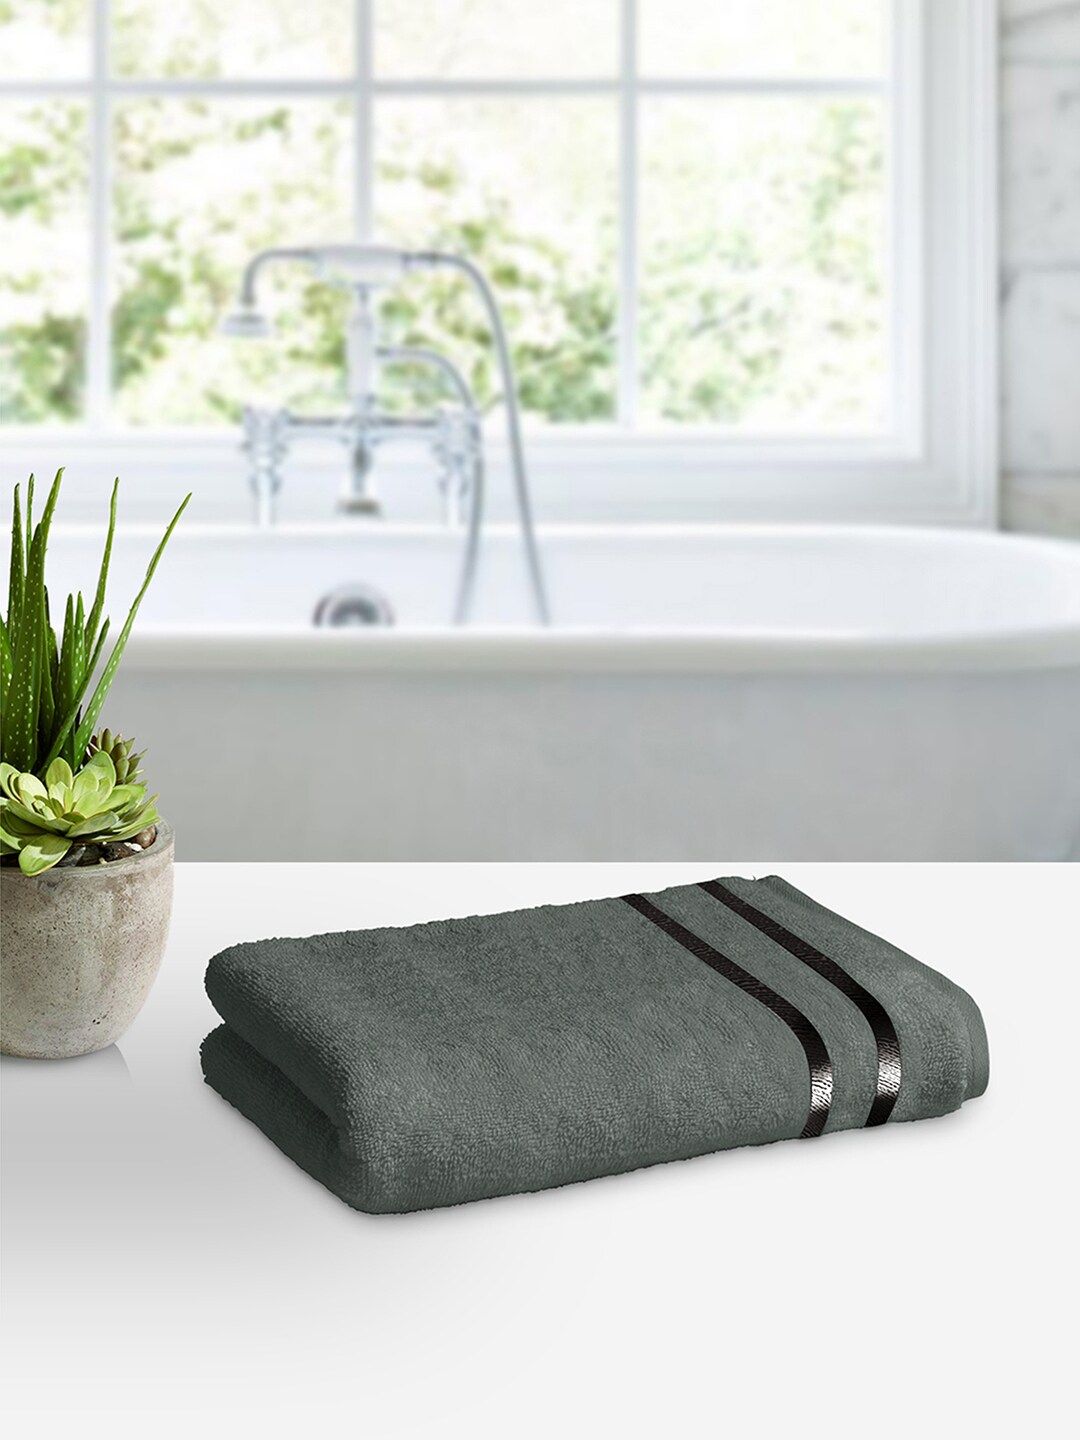 Story@home Charcoal Cotton 450 GSM Bath Towel Price in India